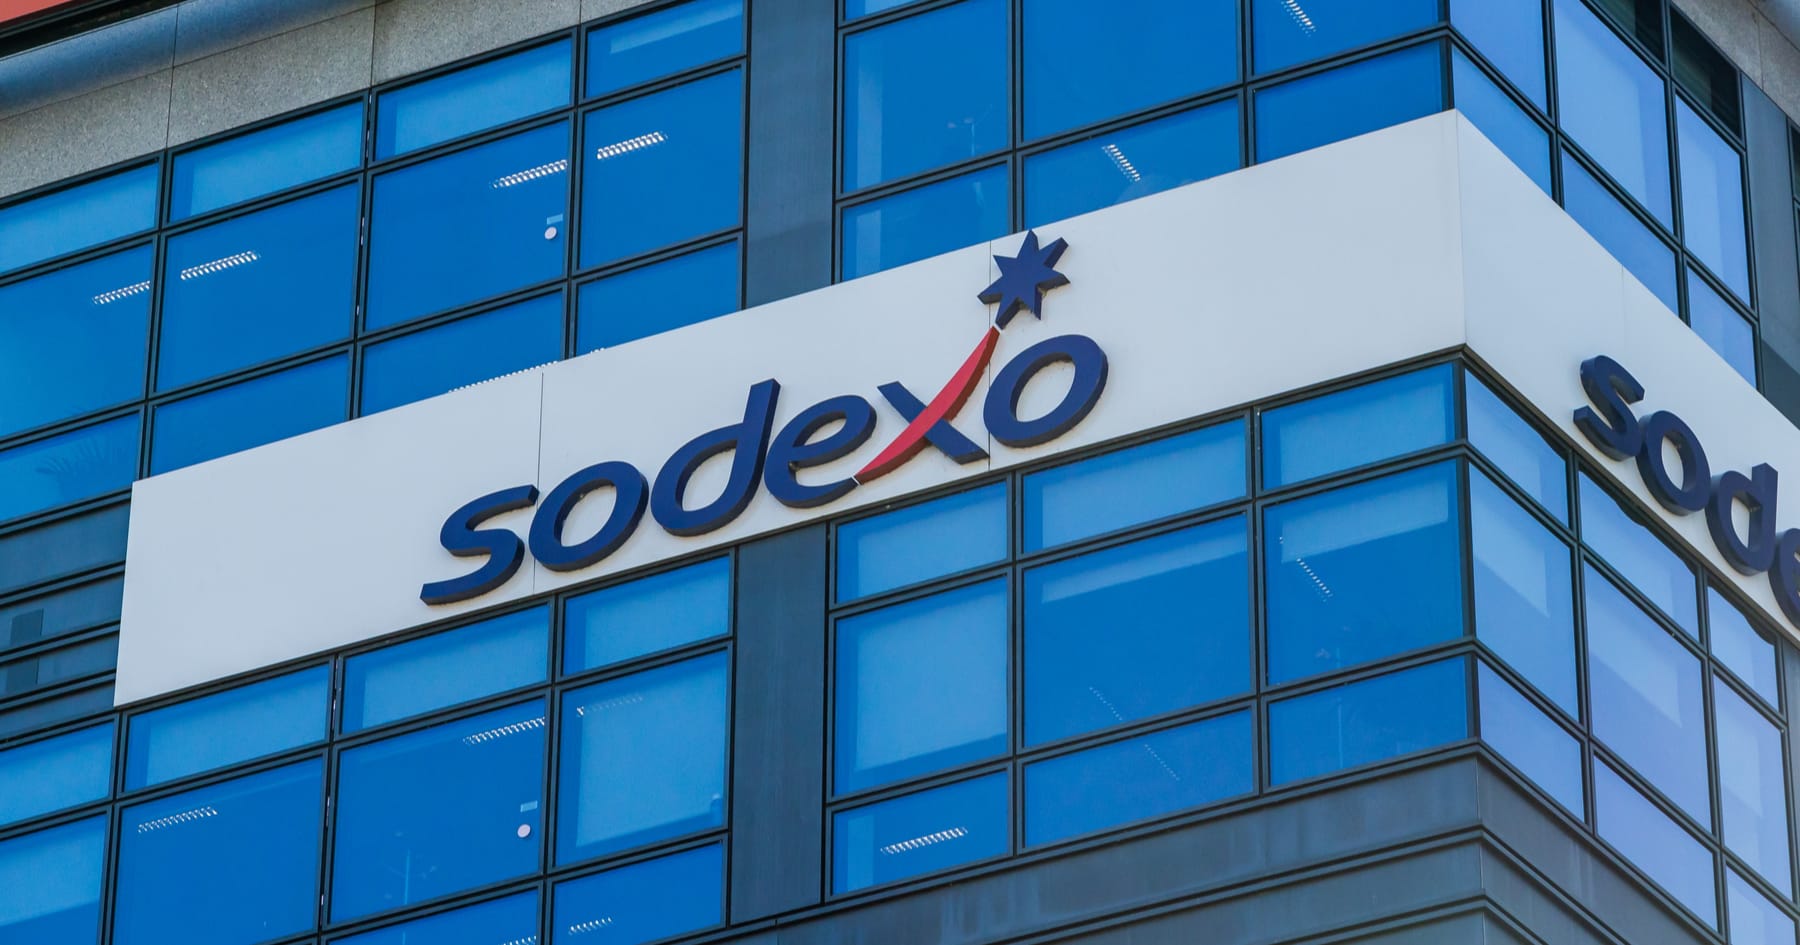 Sodexo Shares Drop as Q3 Revenues Miss Analyst Expectations But Annual Targets Reaffirmed